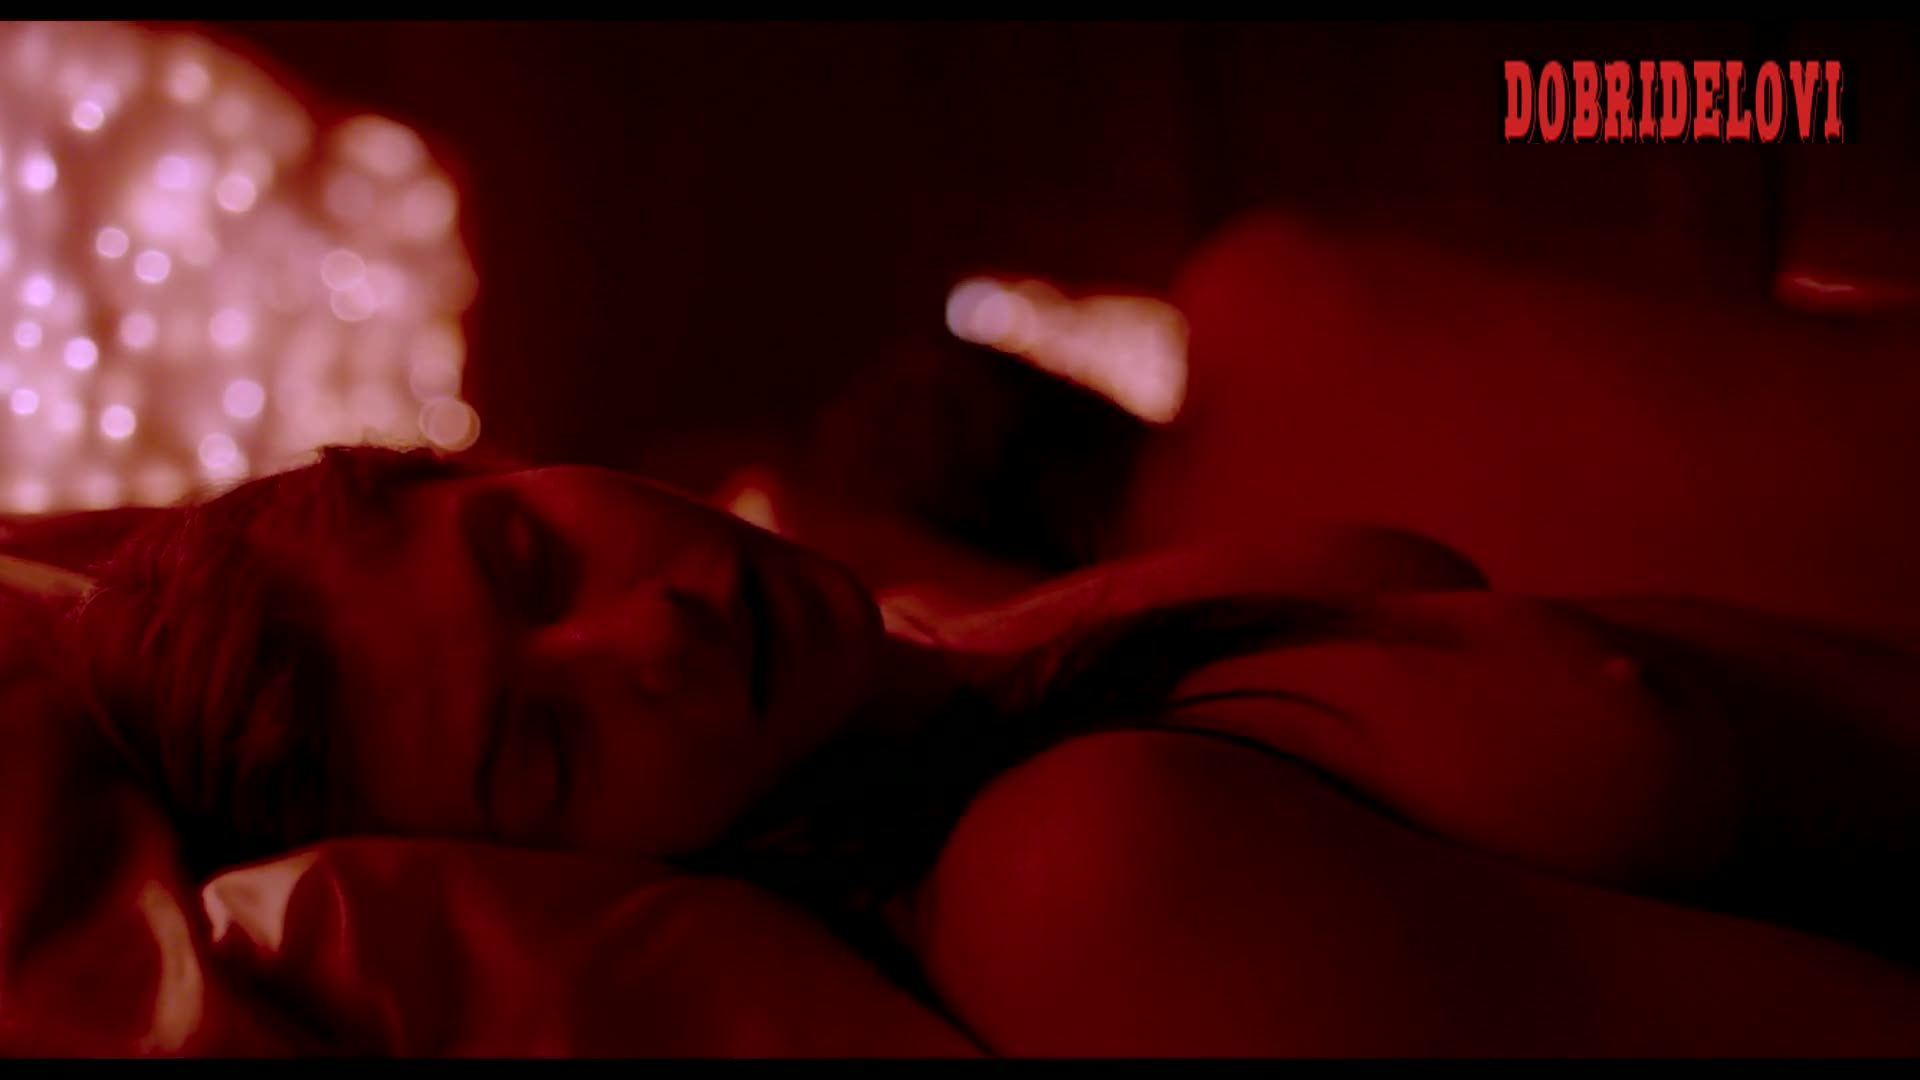 Alexandra Daddario nude closeup in bed scene from Lost Girls and Love Hotels video image